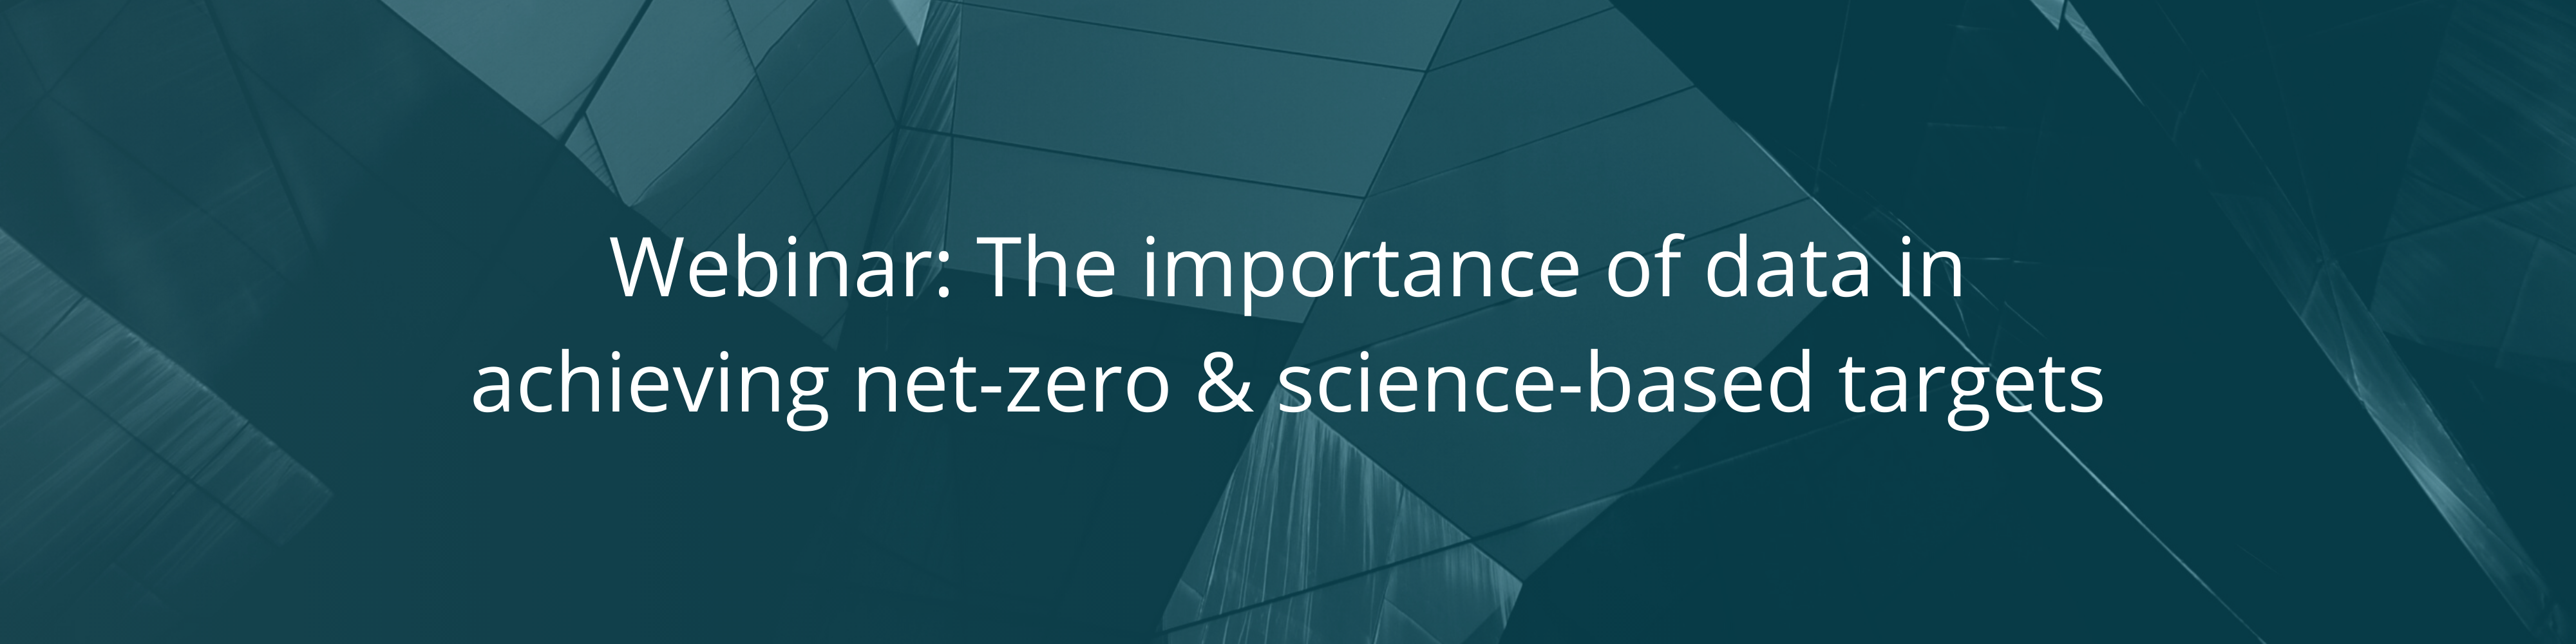 The importance of data in achieving net-zero & science-based targets